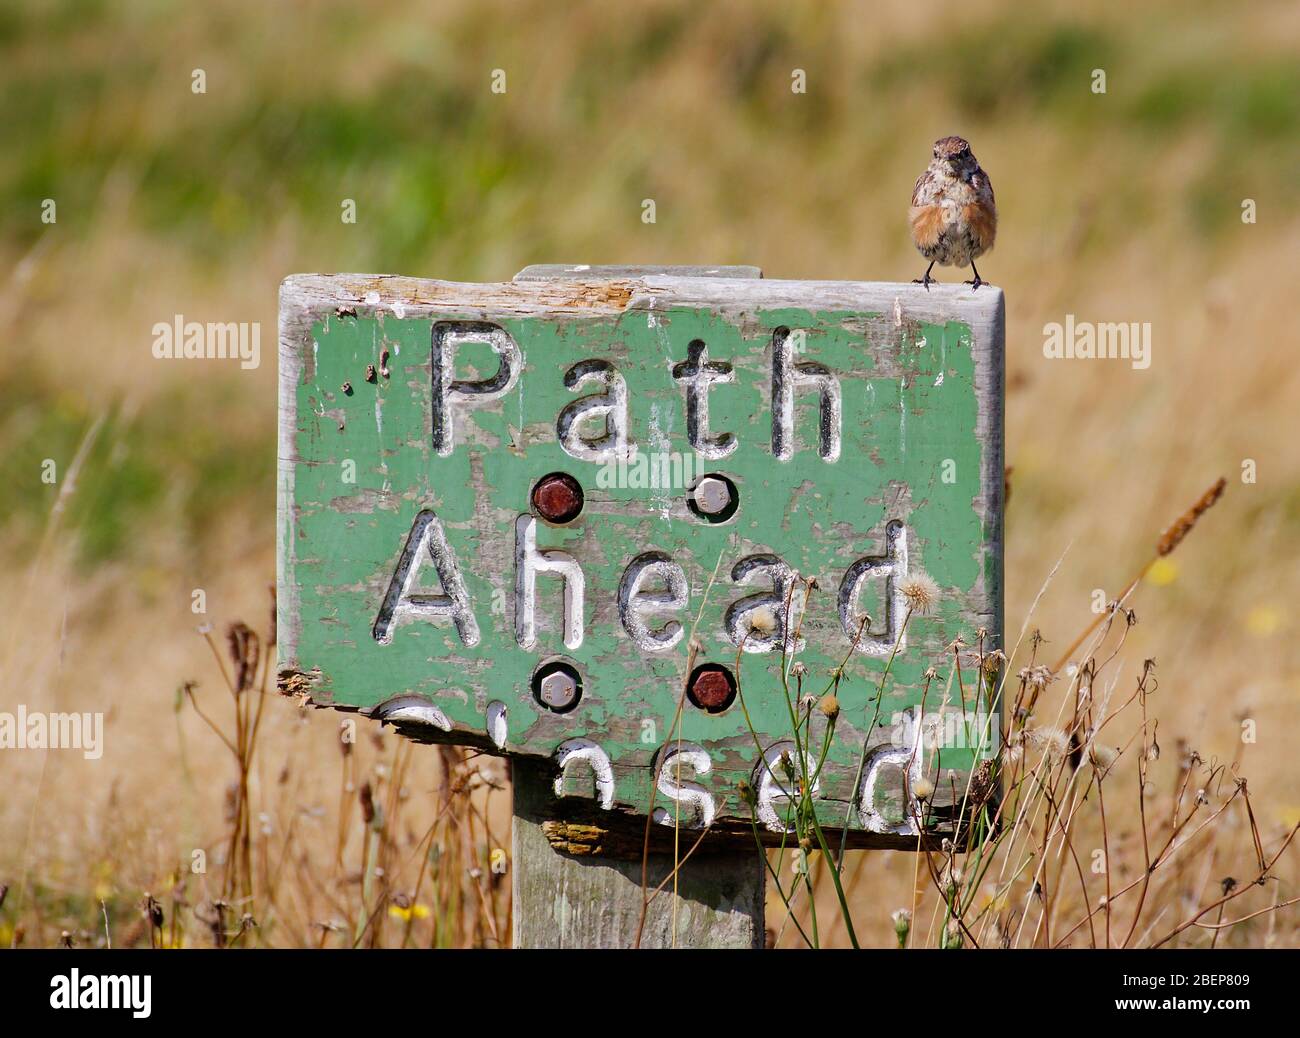 Stonechat, Saxicola torquata, sitting on a weathered Path Ahead Closed sign in a field. Taken at Hengistbury Head UK Stock Photo